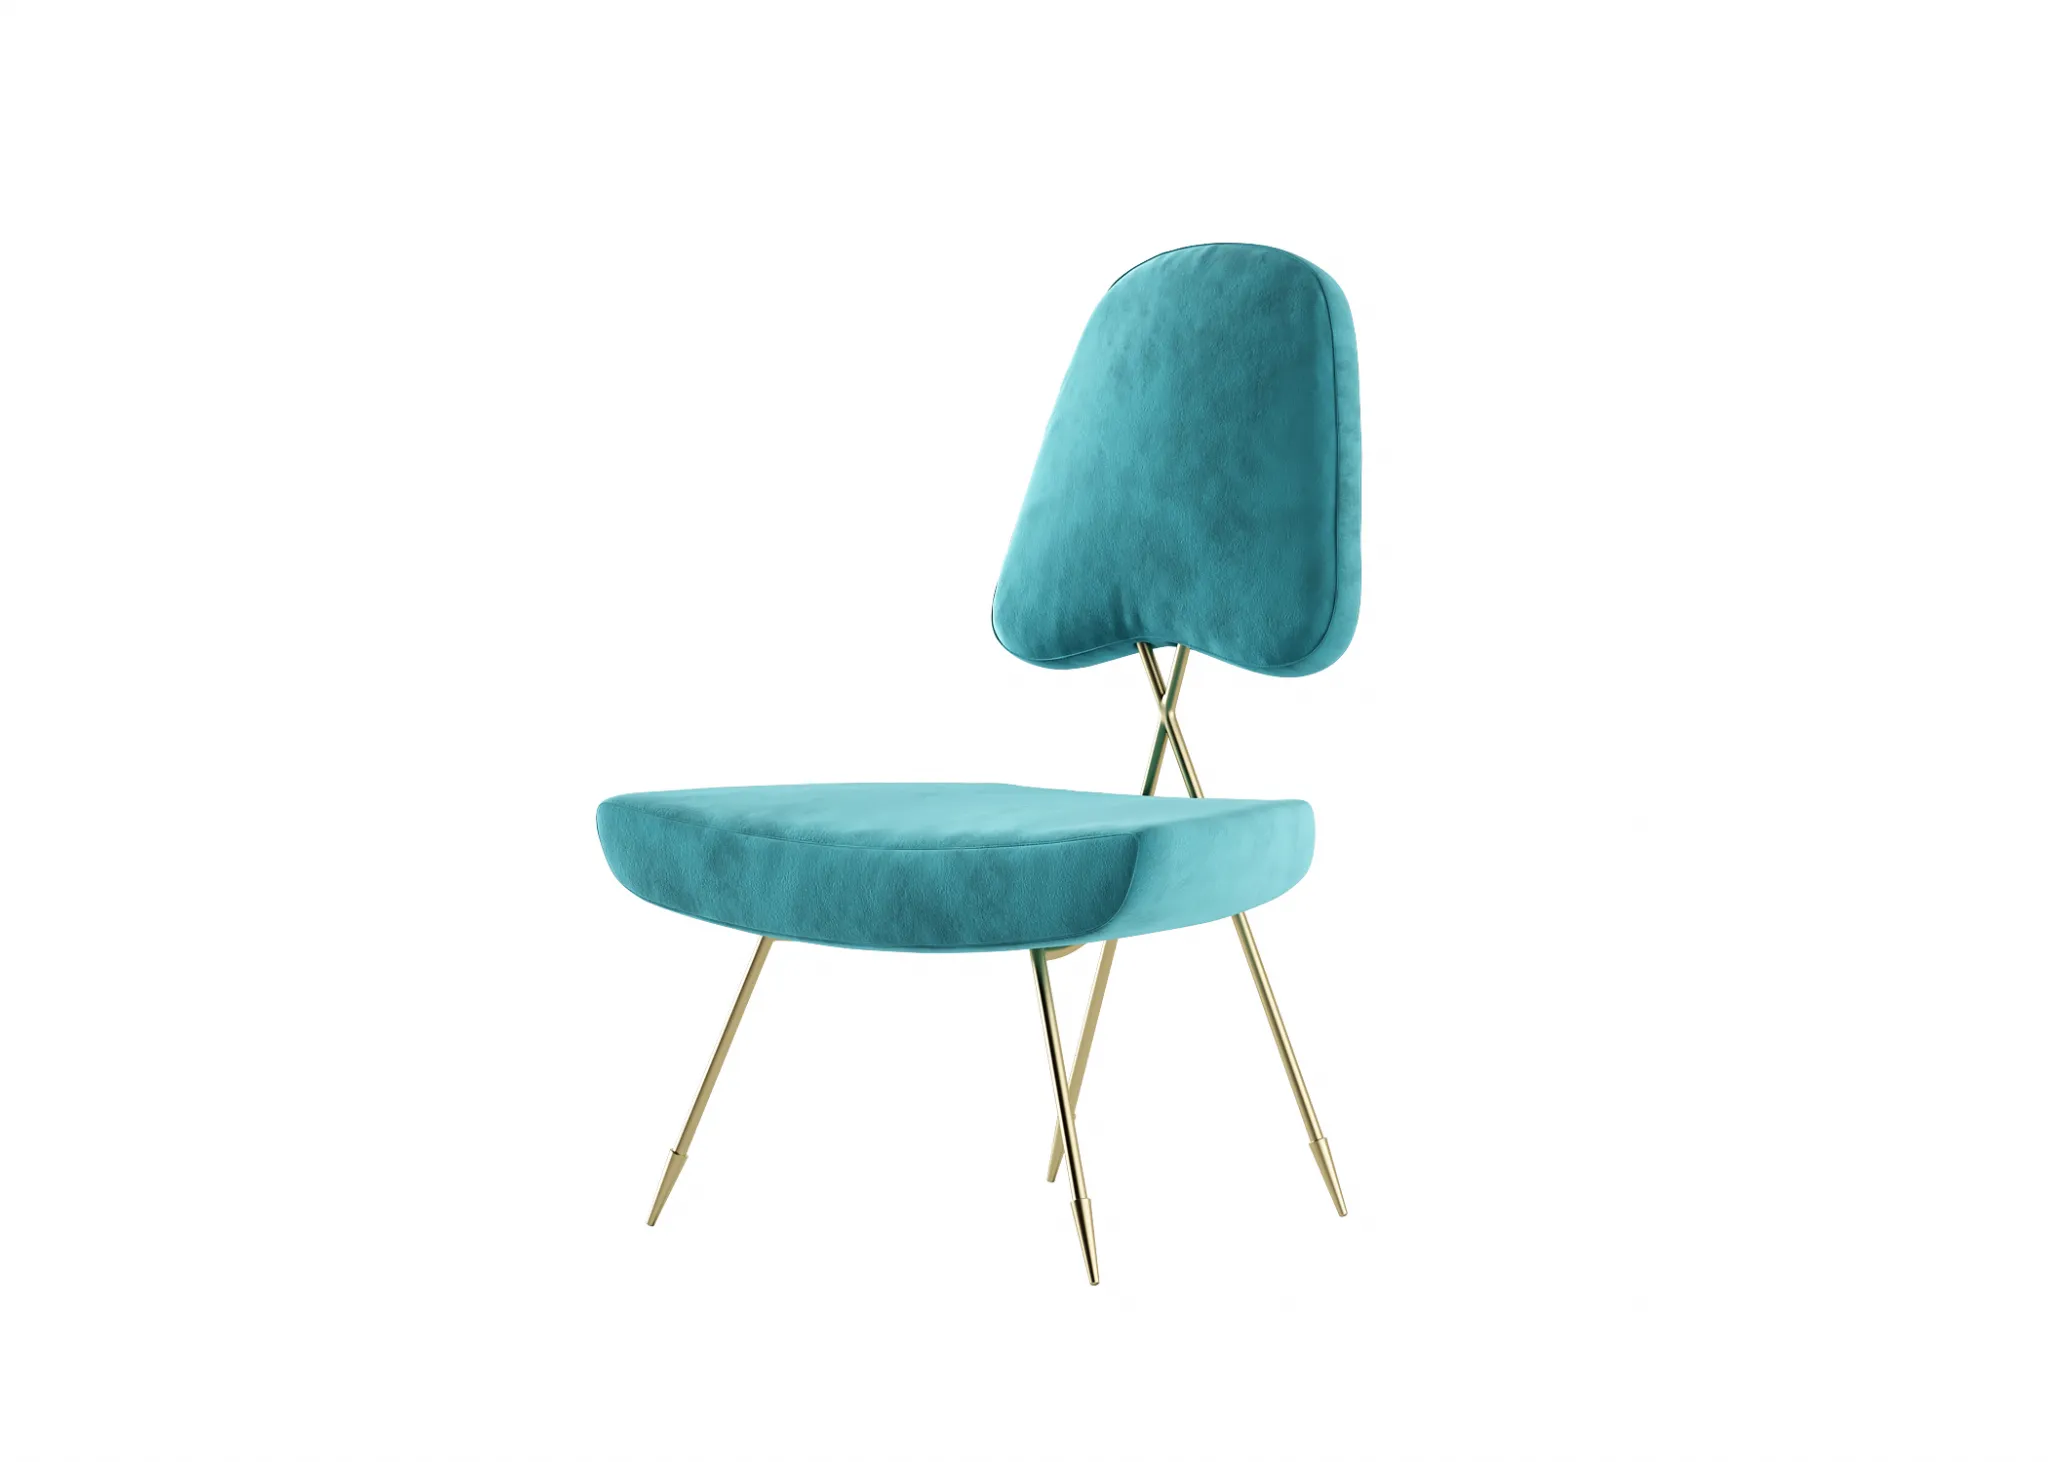 FURNITURE 3D MODELS – CHAIRS – 0348